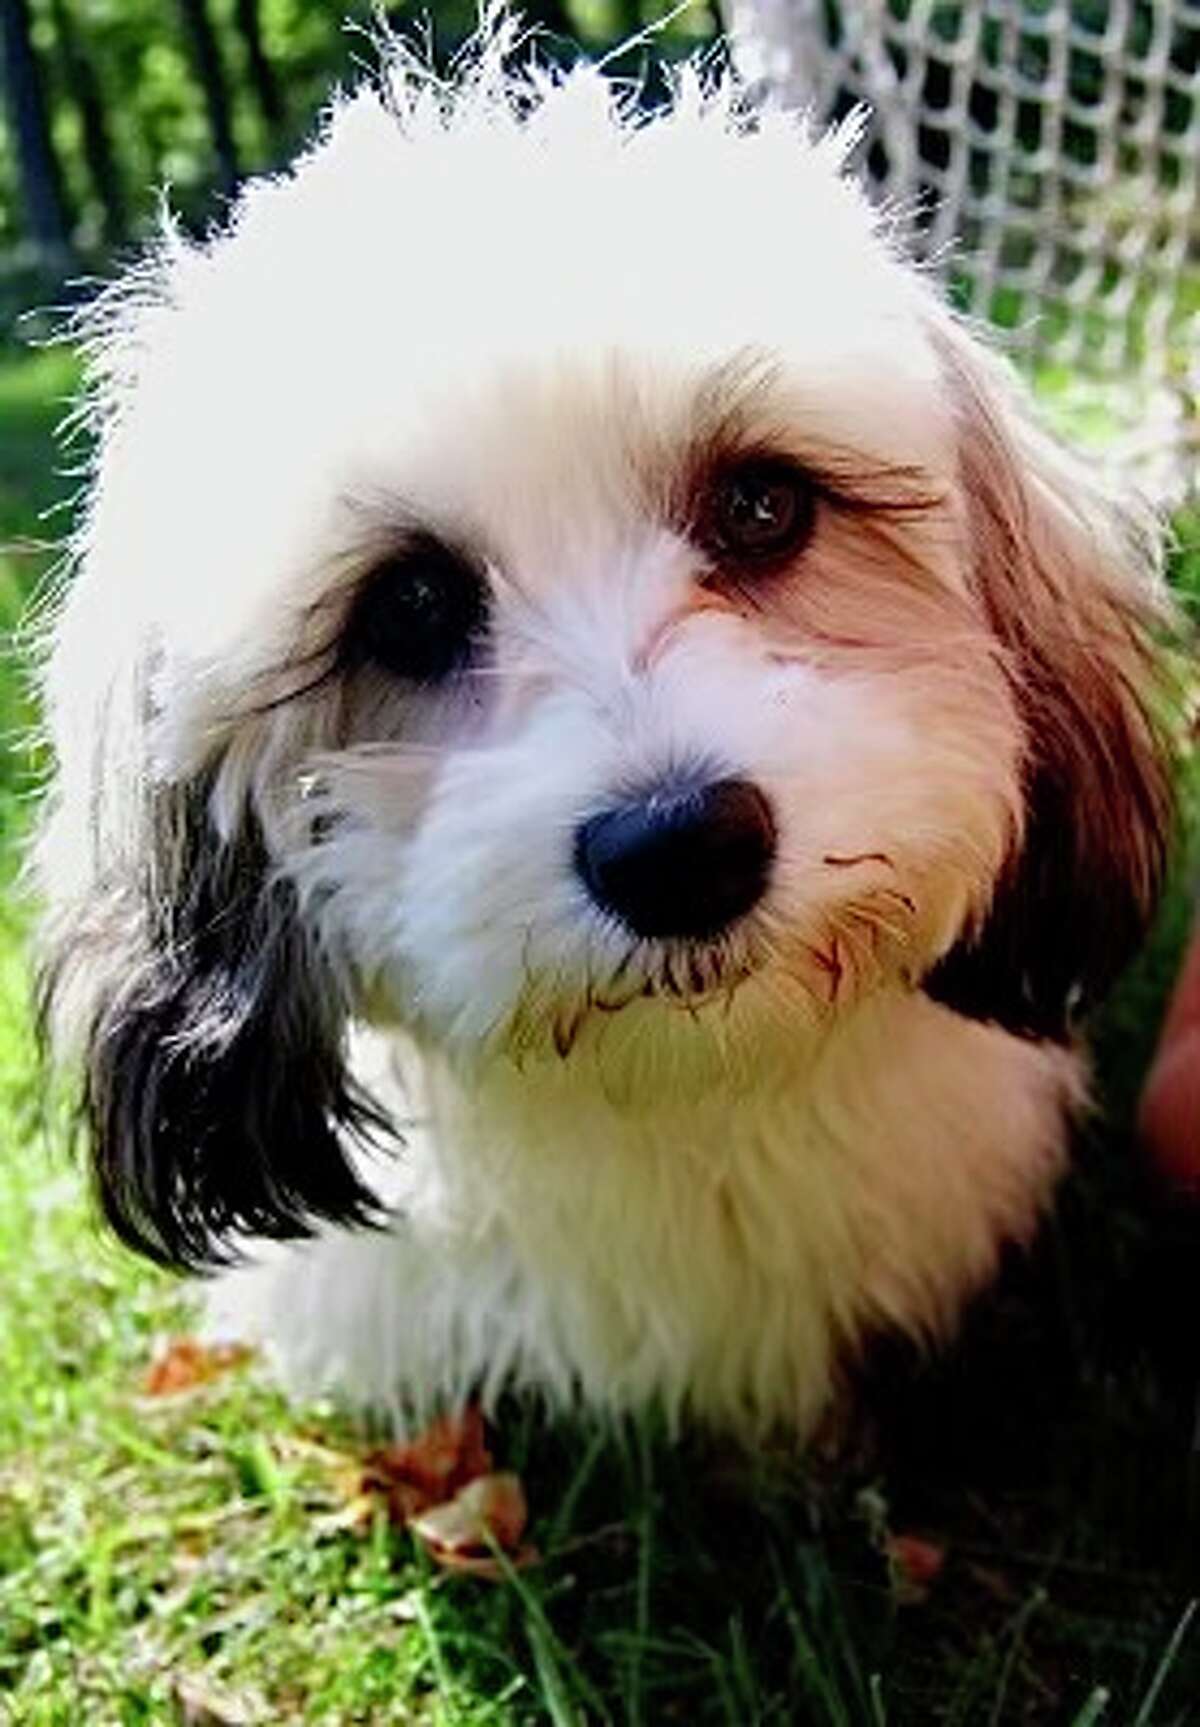 Lily, a Shi Tzu mix, was run over and killed at her home in Ridgefield in April 2021. Owners Neil and Meg Brisson sued the delivery company, but a judge ruled recently that they cannot seek damages for emotional distress since a dog under state law is considered property.